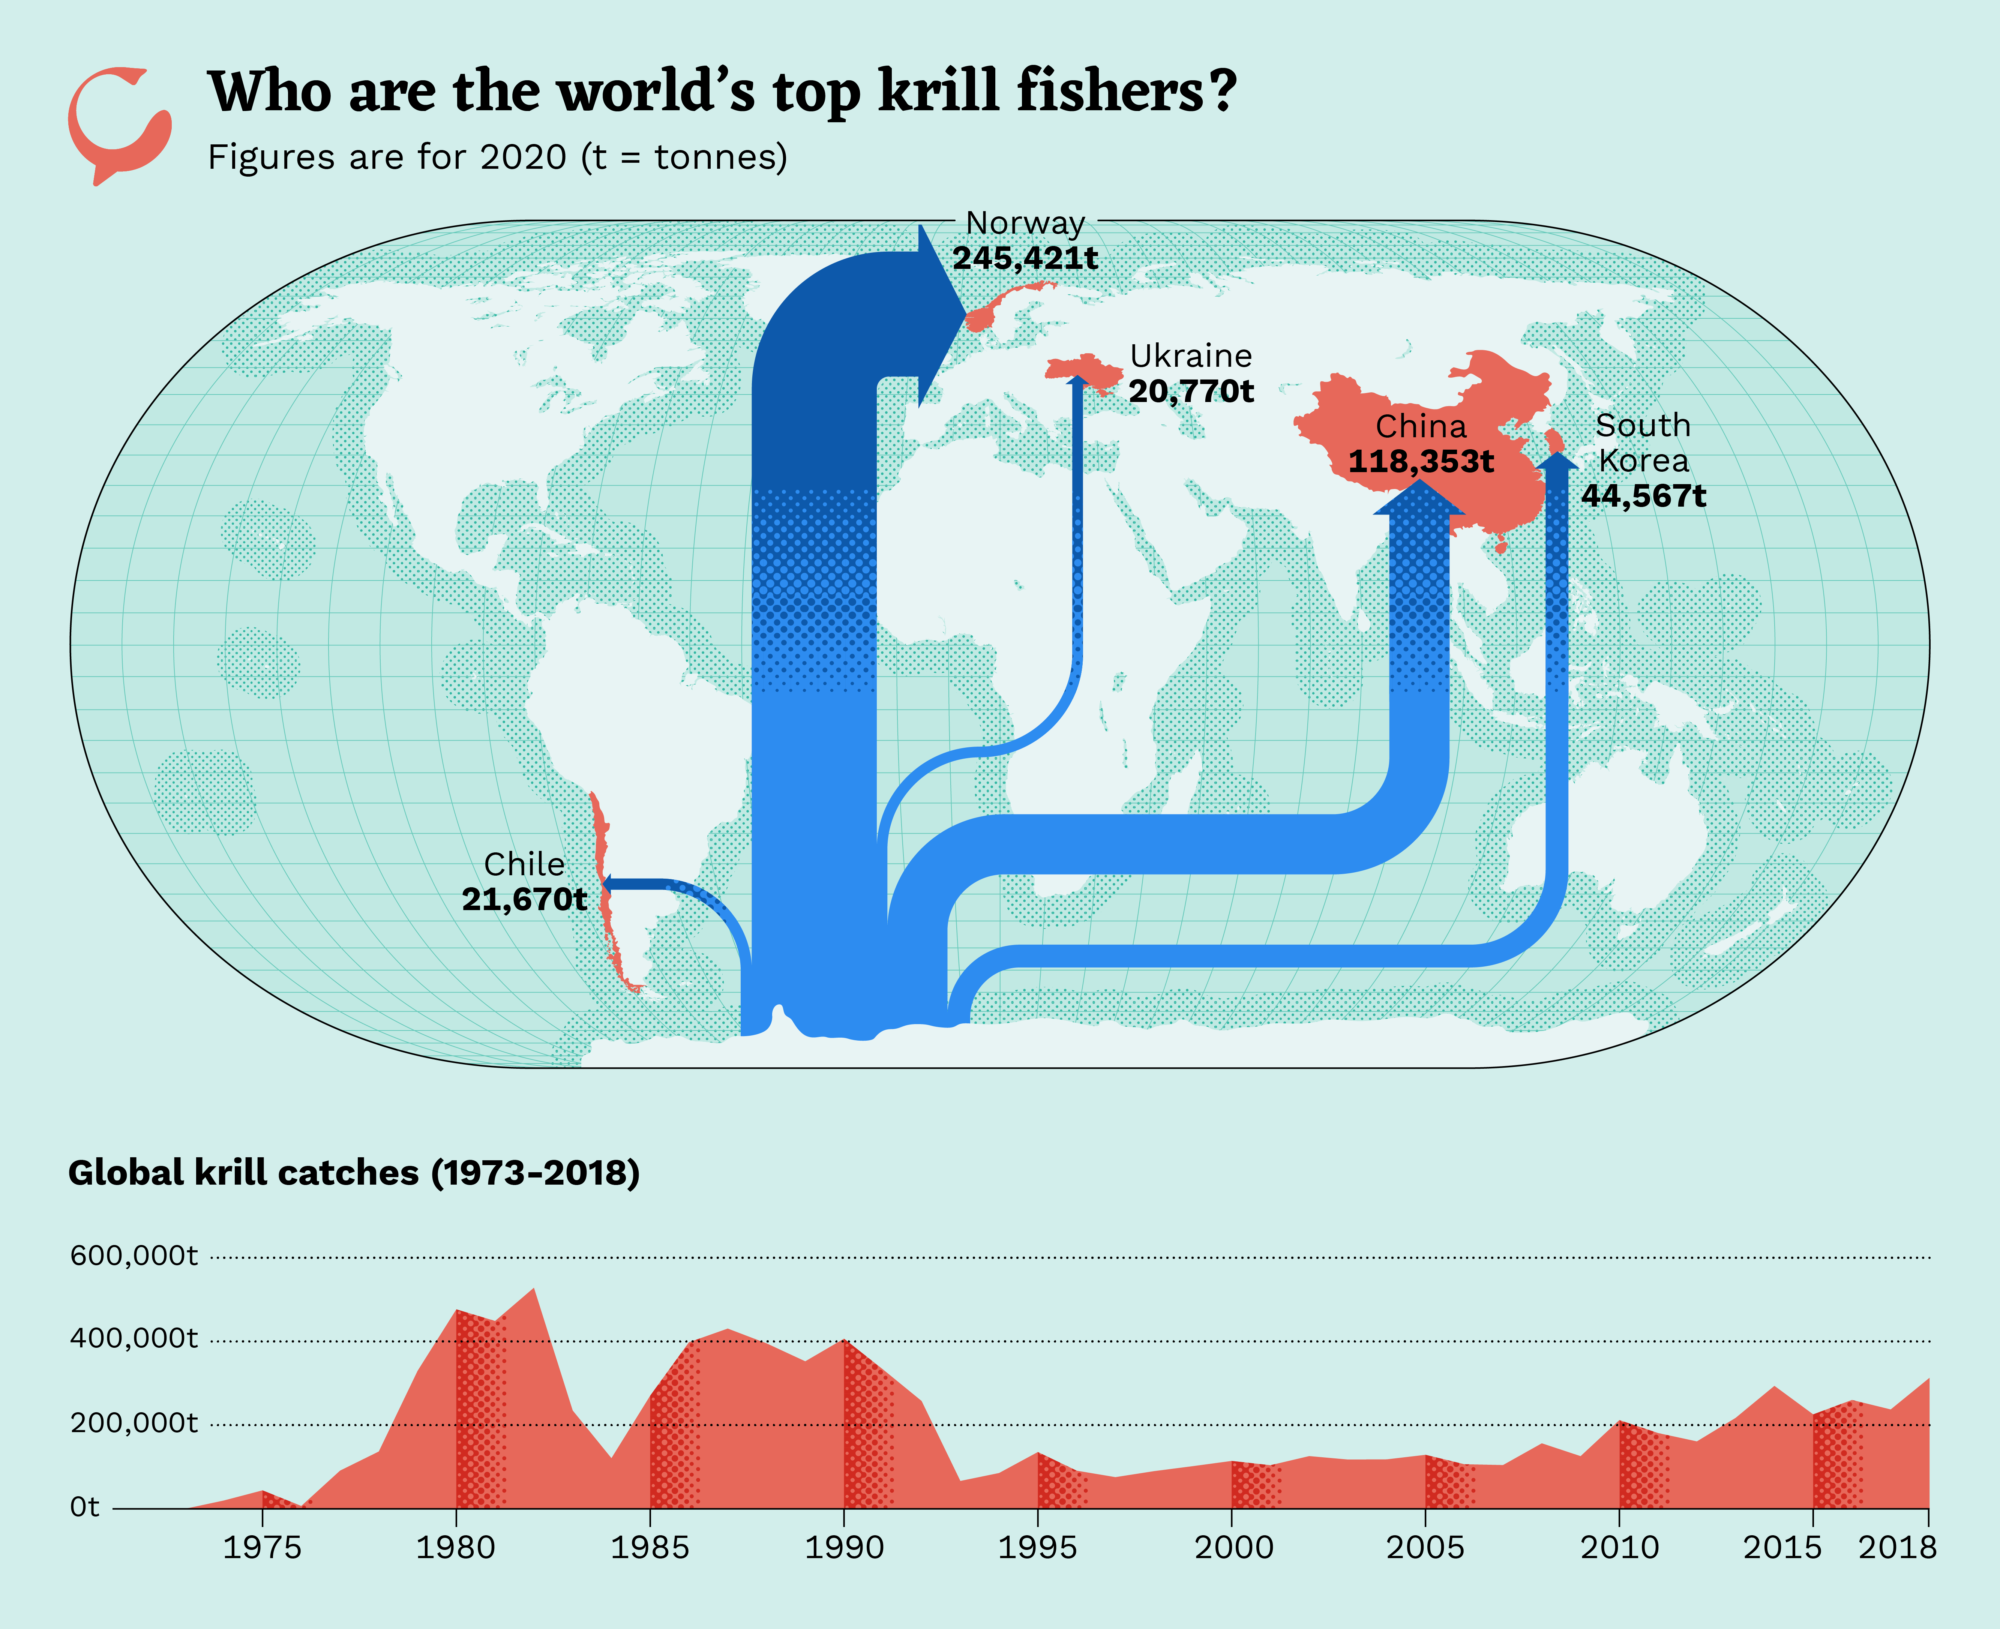 who are the world's top krill fishers?